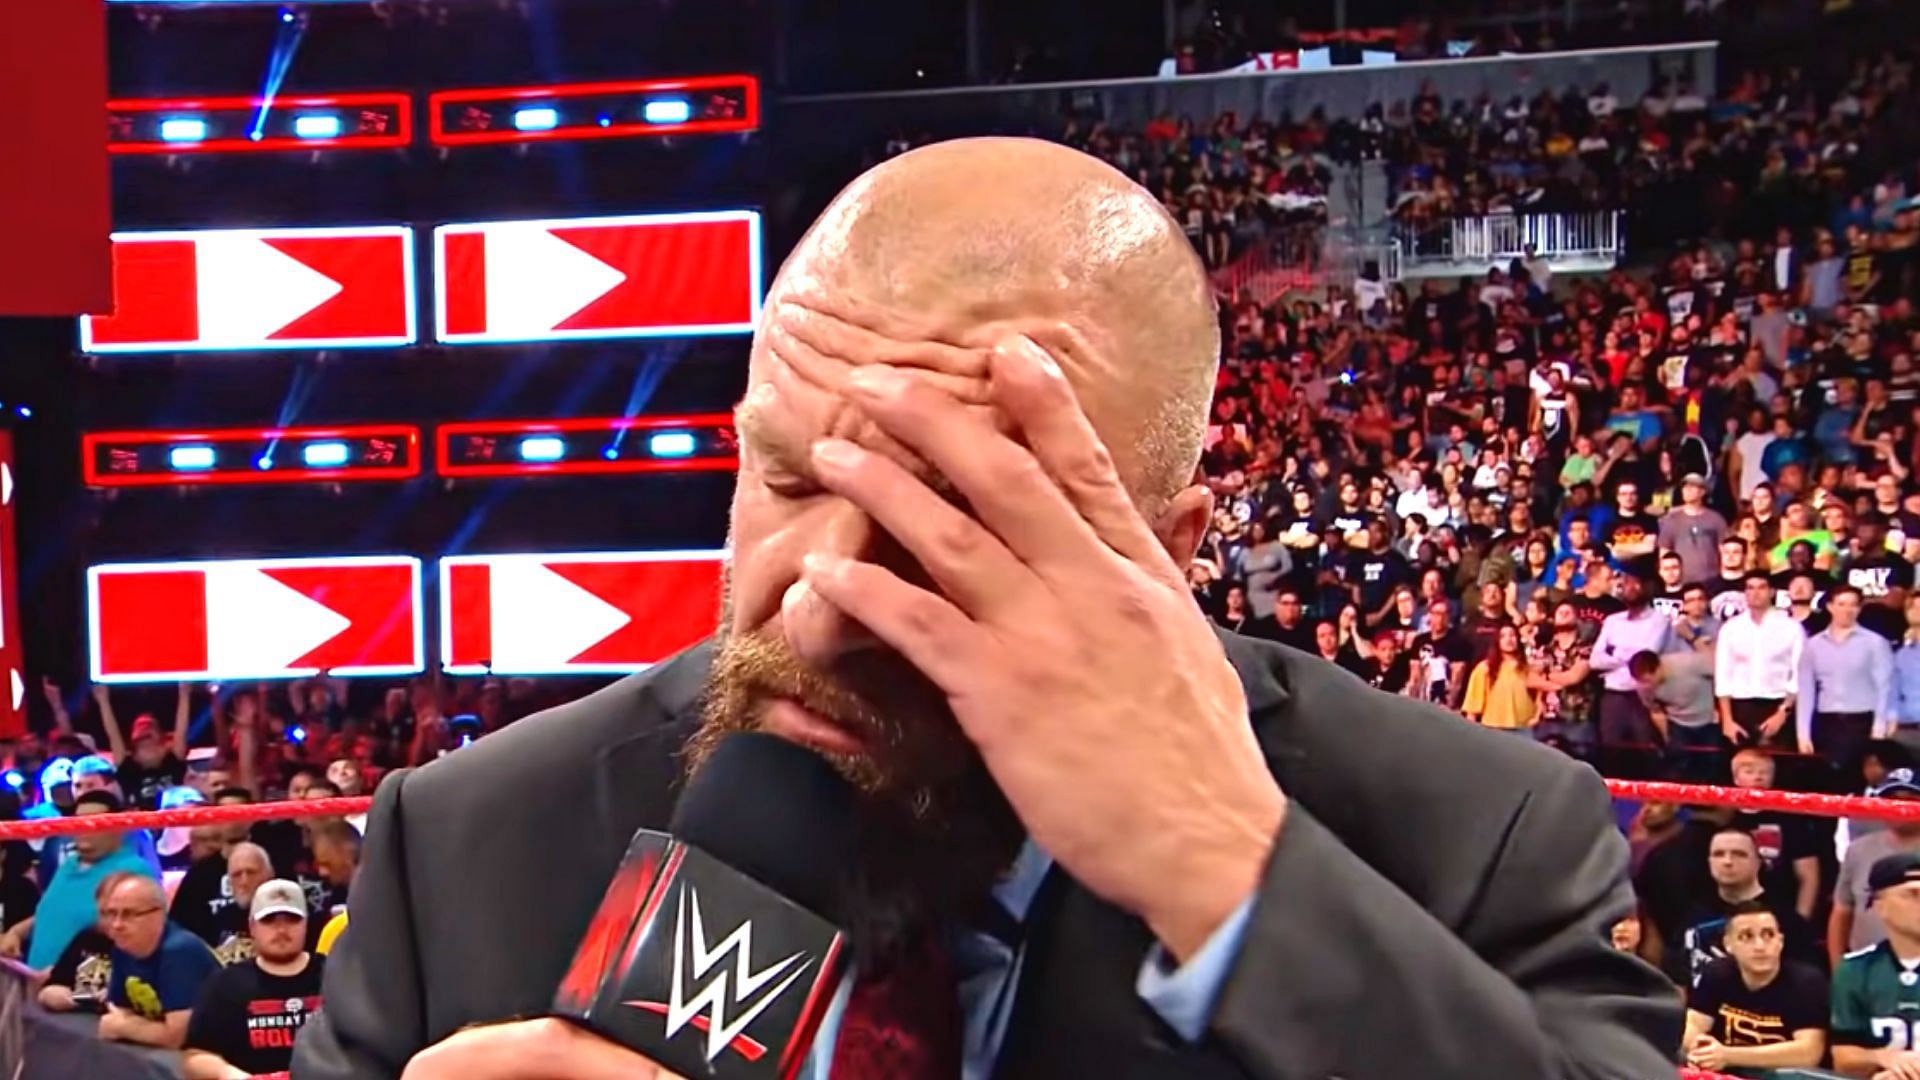 Triple H has been on a hiatus since September.